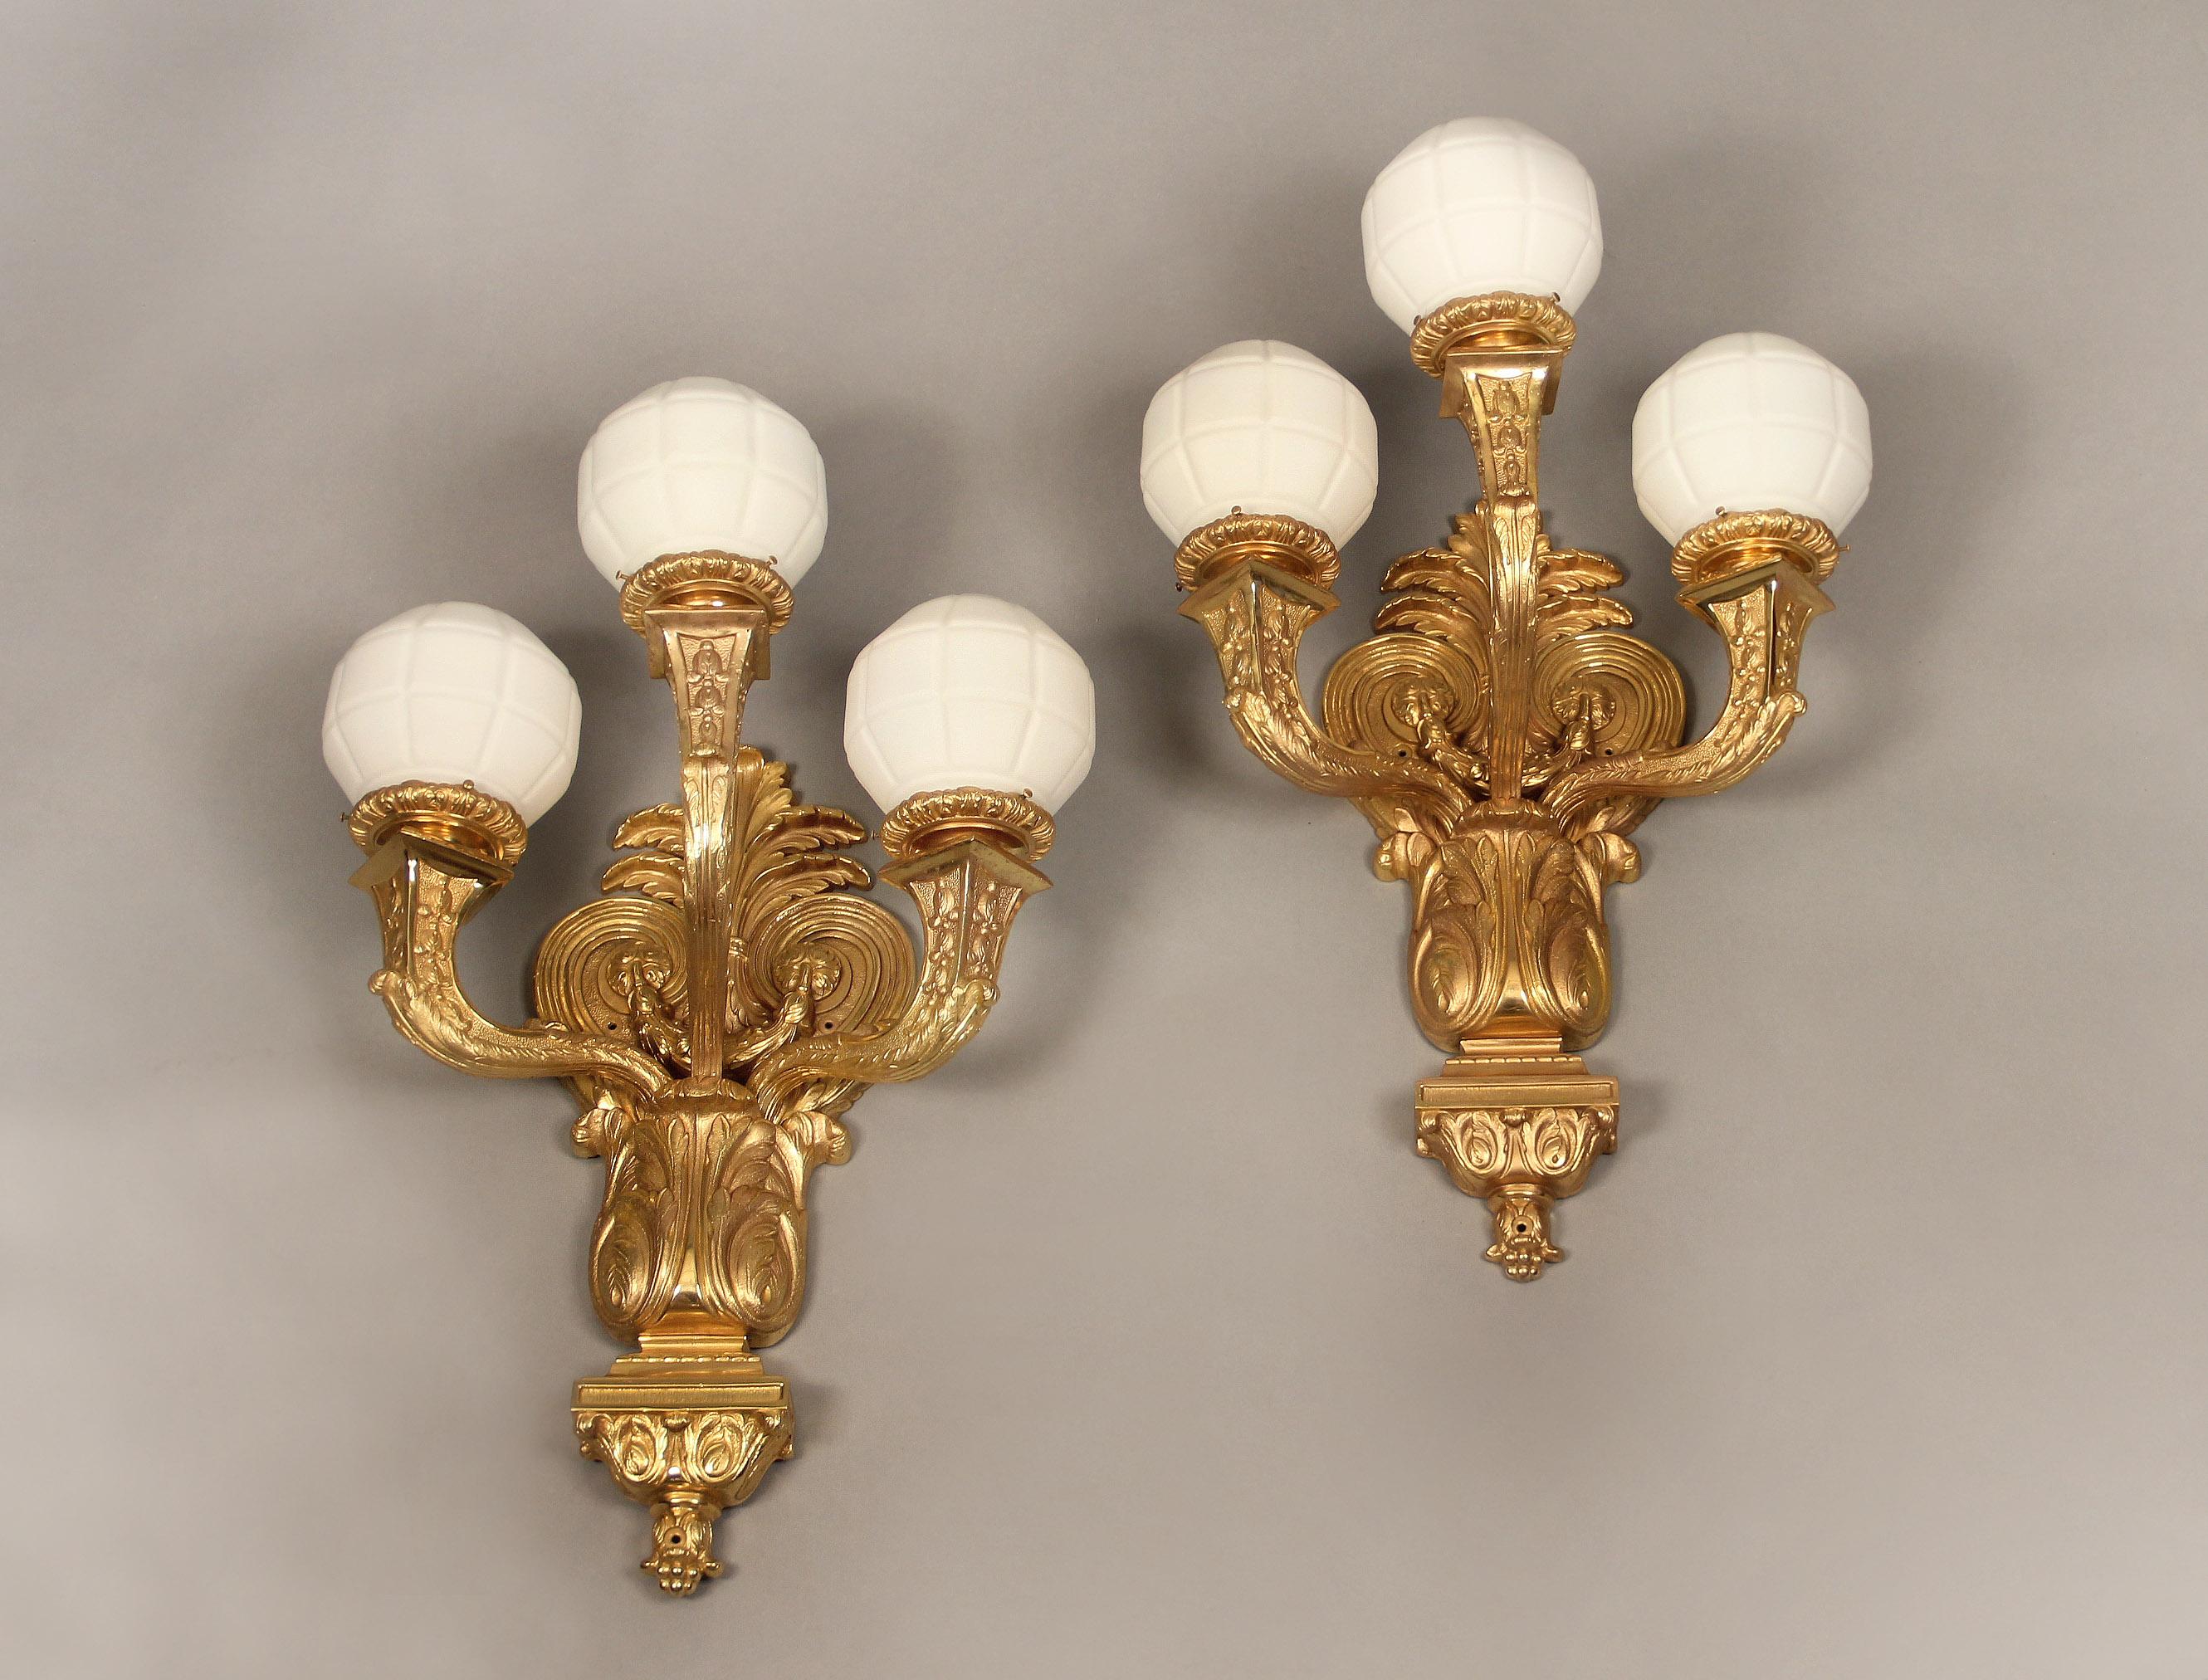 A large pair of early 20th century gilt bronze three-light sconces

A heavily chiseled foliate back plate and three strong arms with white glass globes.